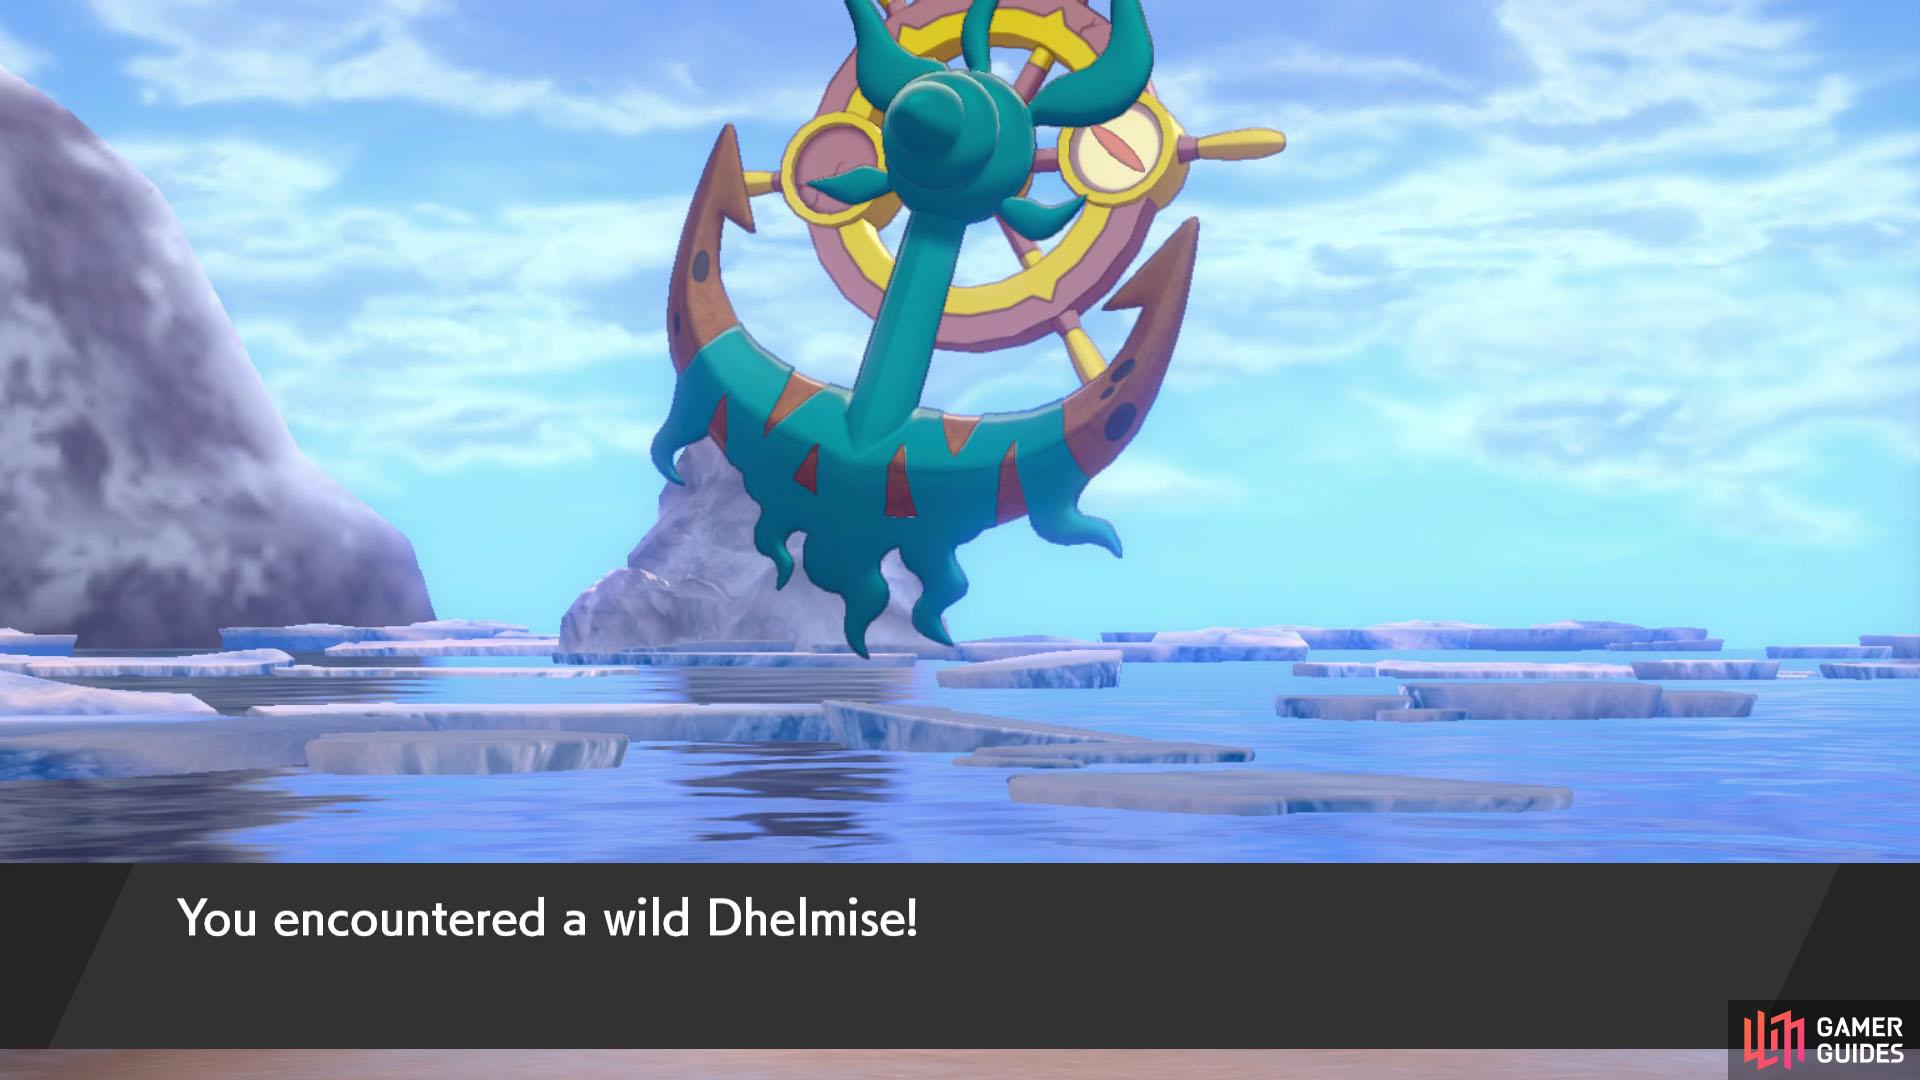 Dhelmise’s Ability boosts the power of its Steel-type moves by 50%, effectively giving it STAB.